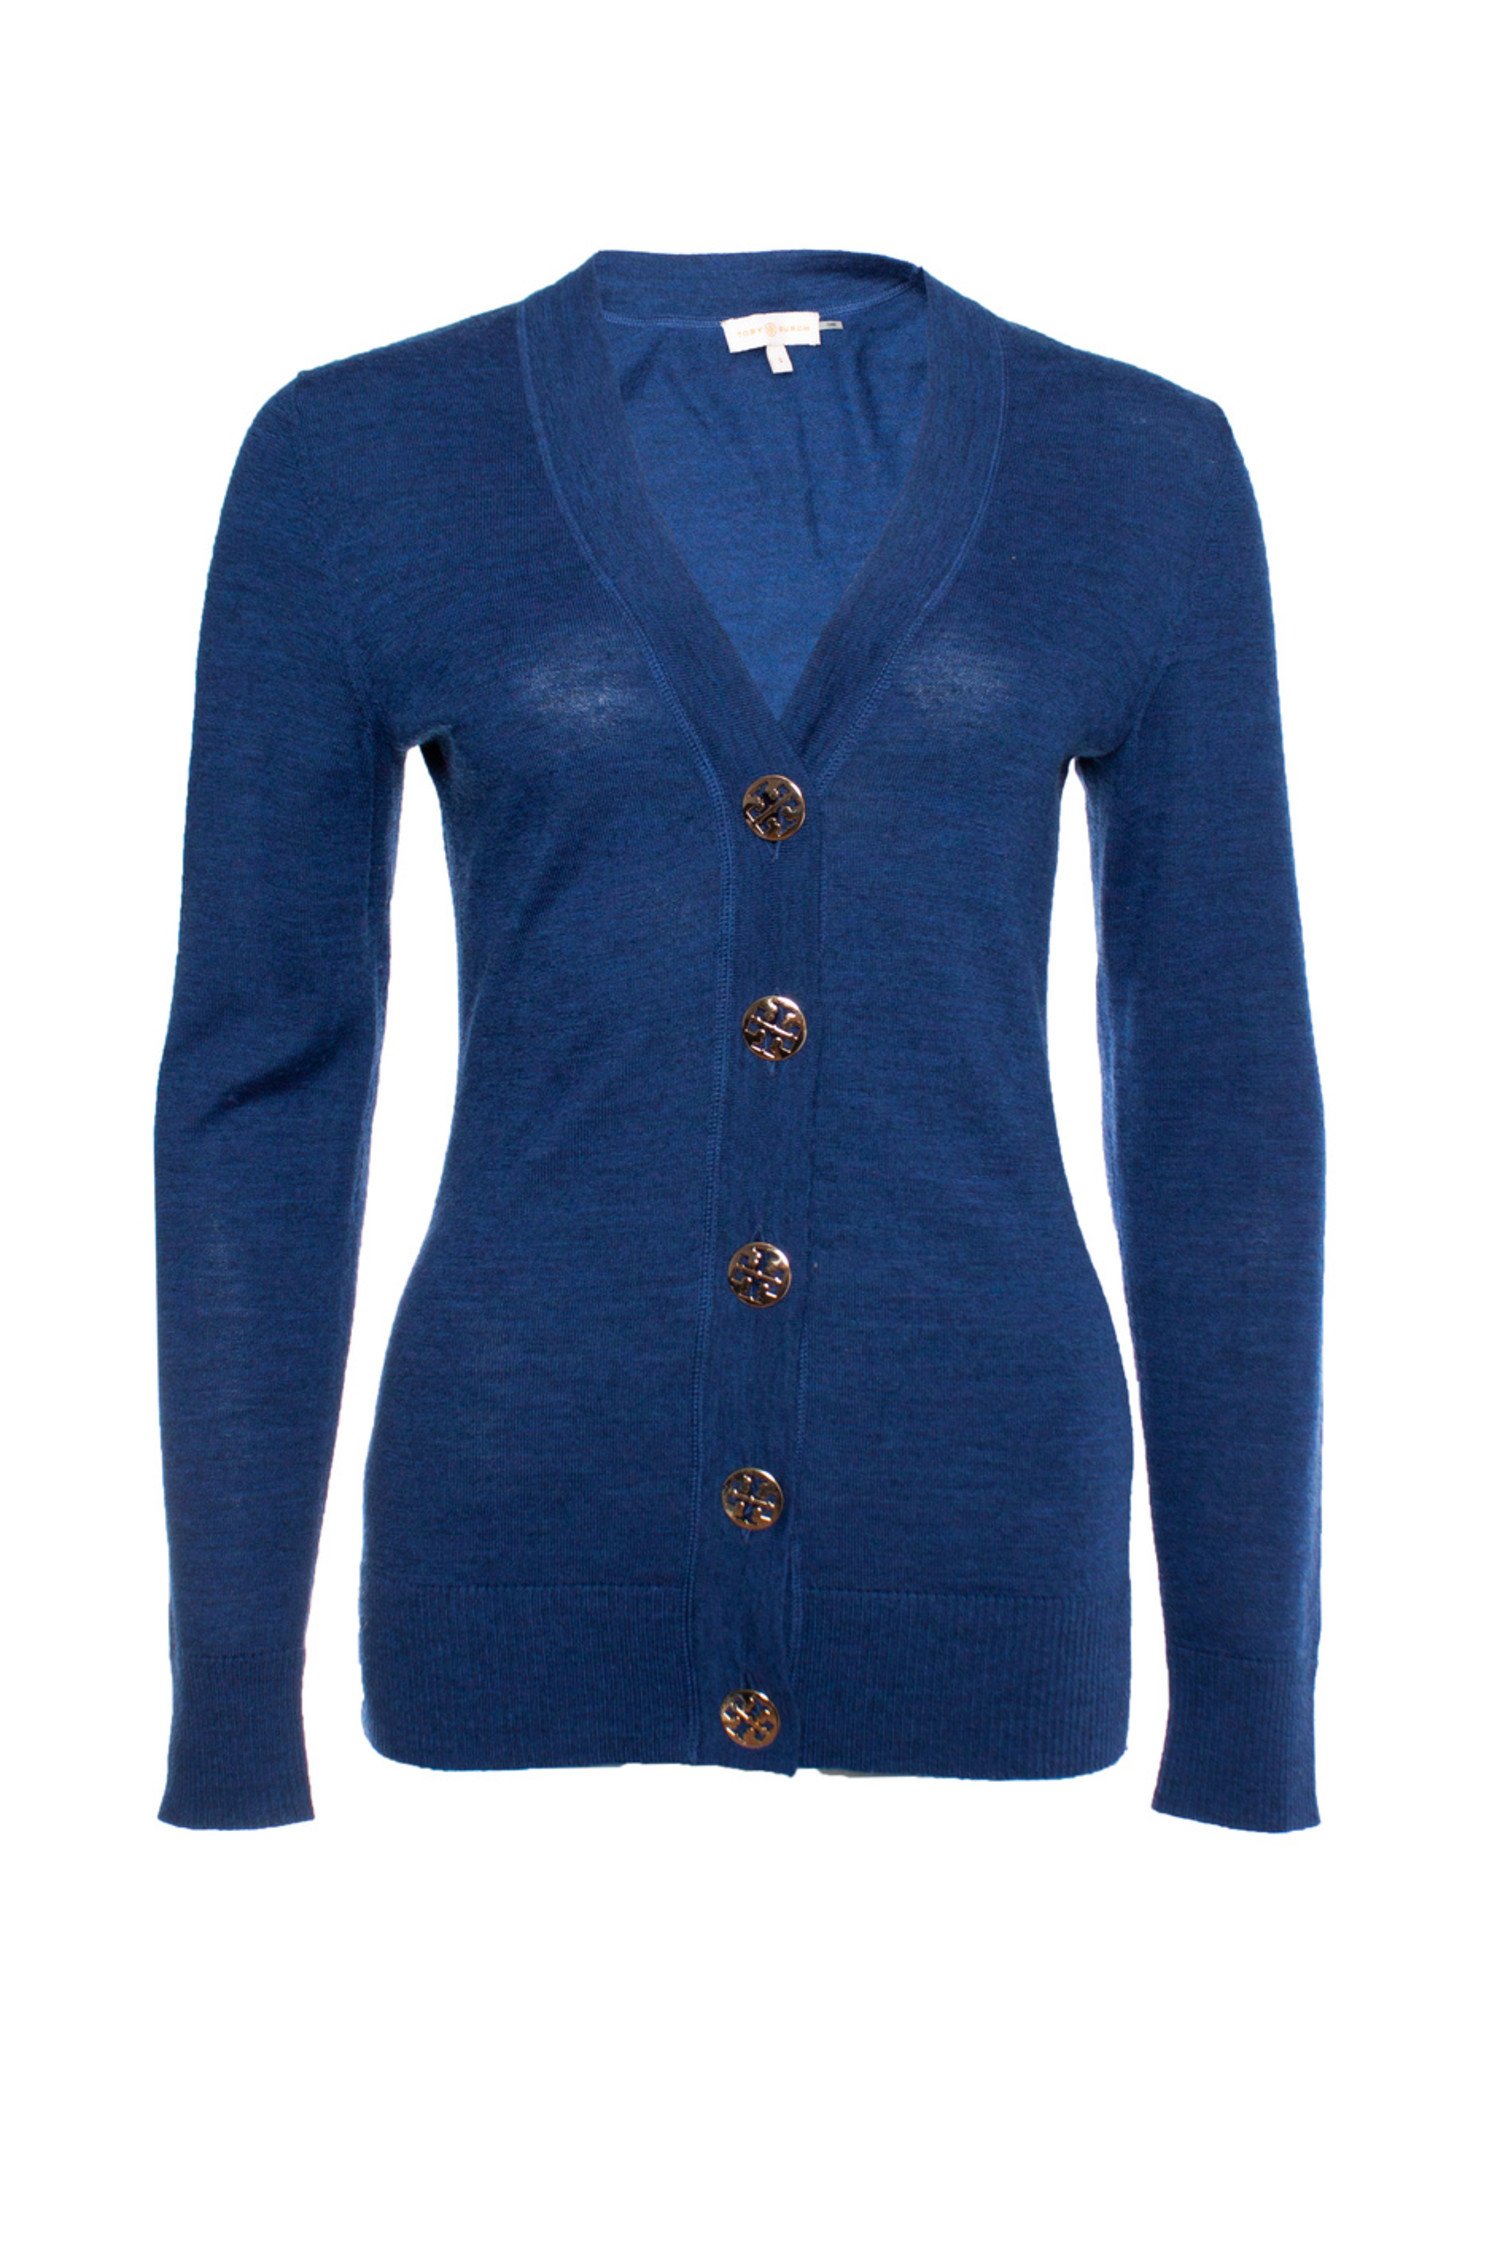 Tory Burch, Blue cardigan with gold buttons - Unique Designer Pieces